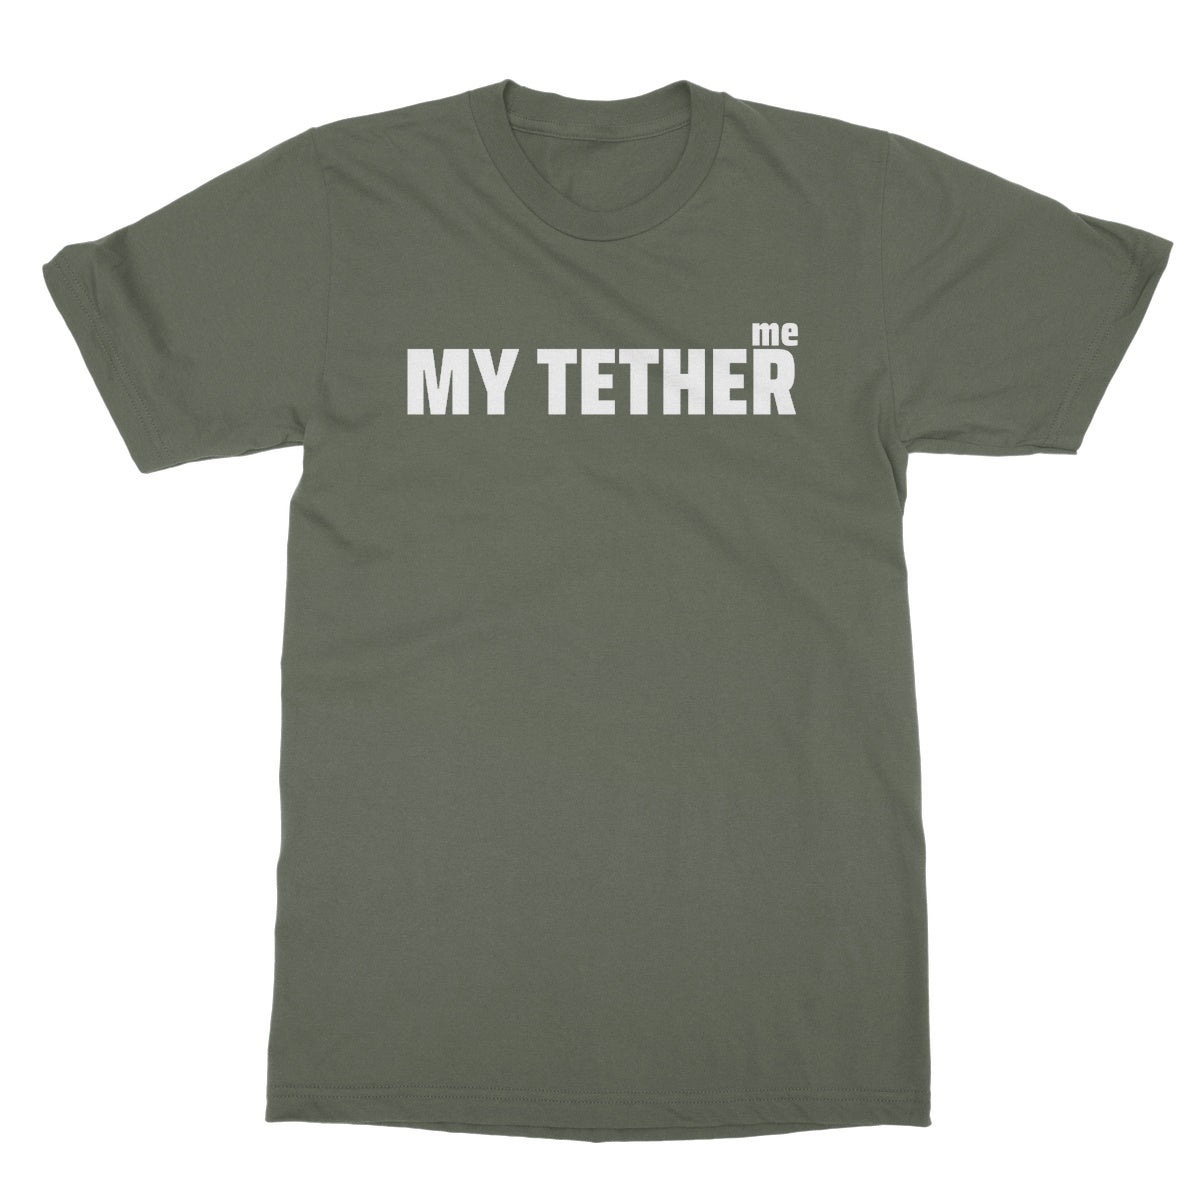 end of my tether t shirt green